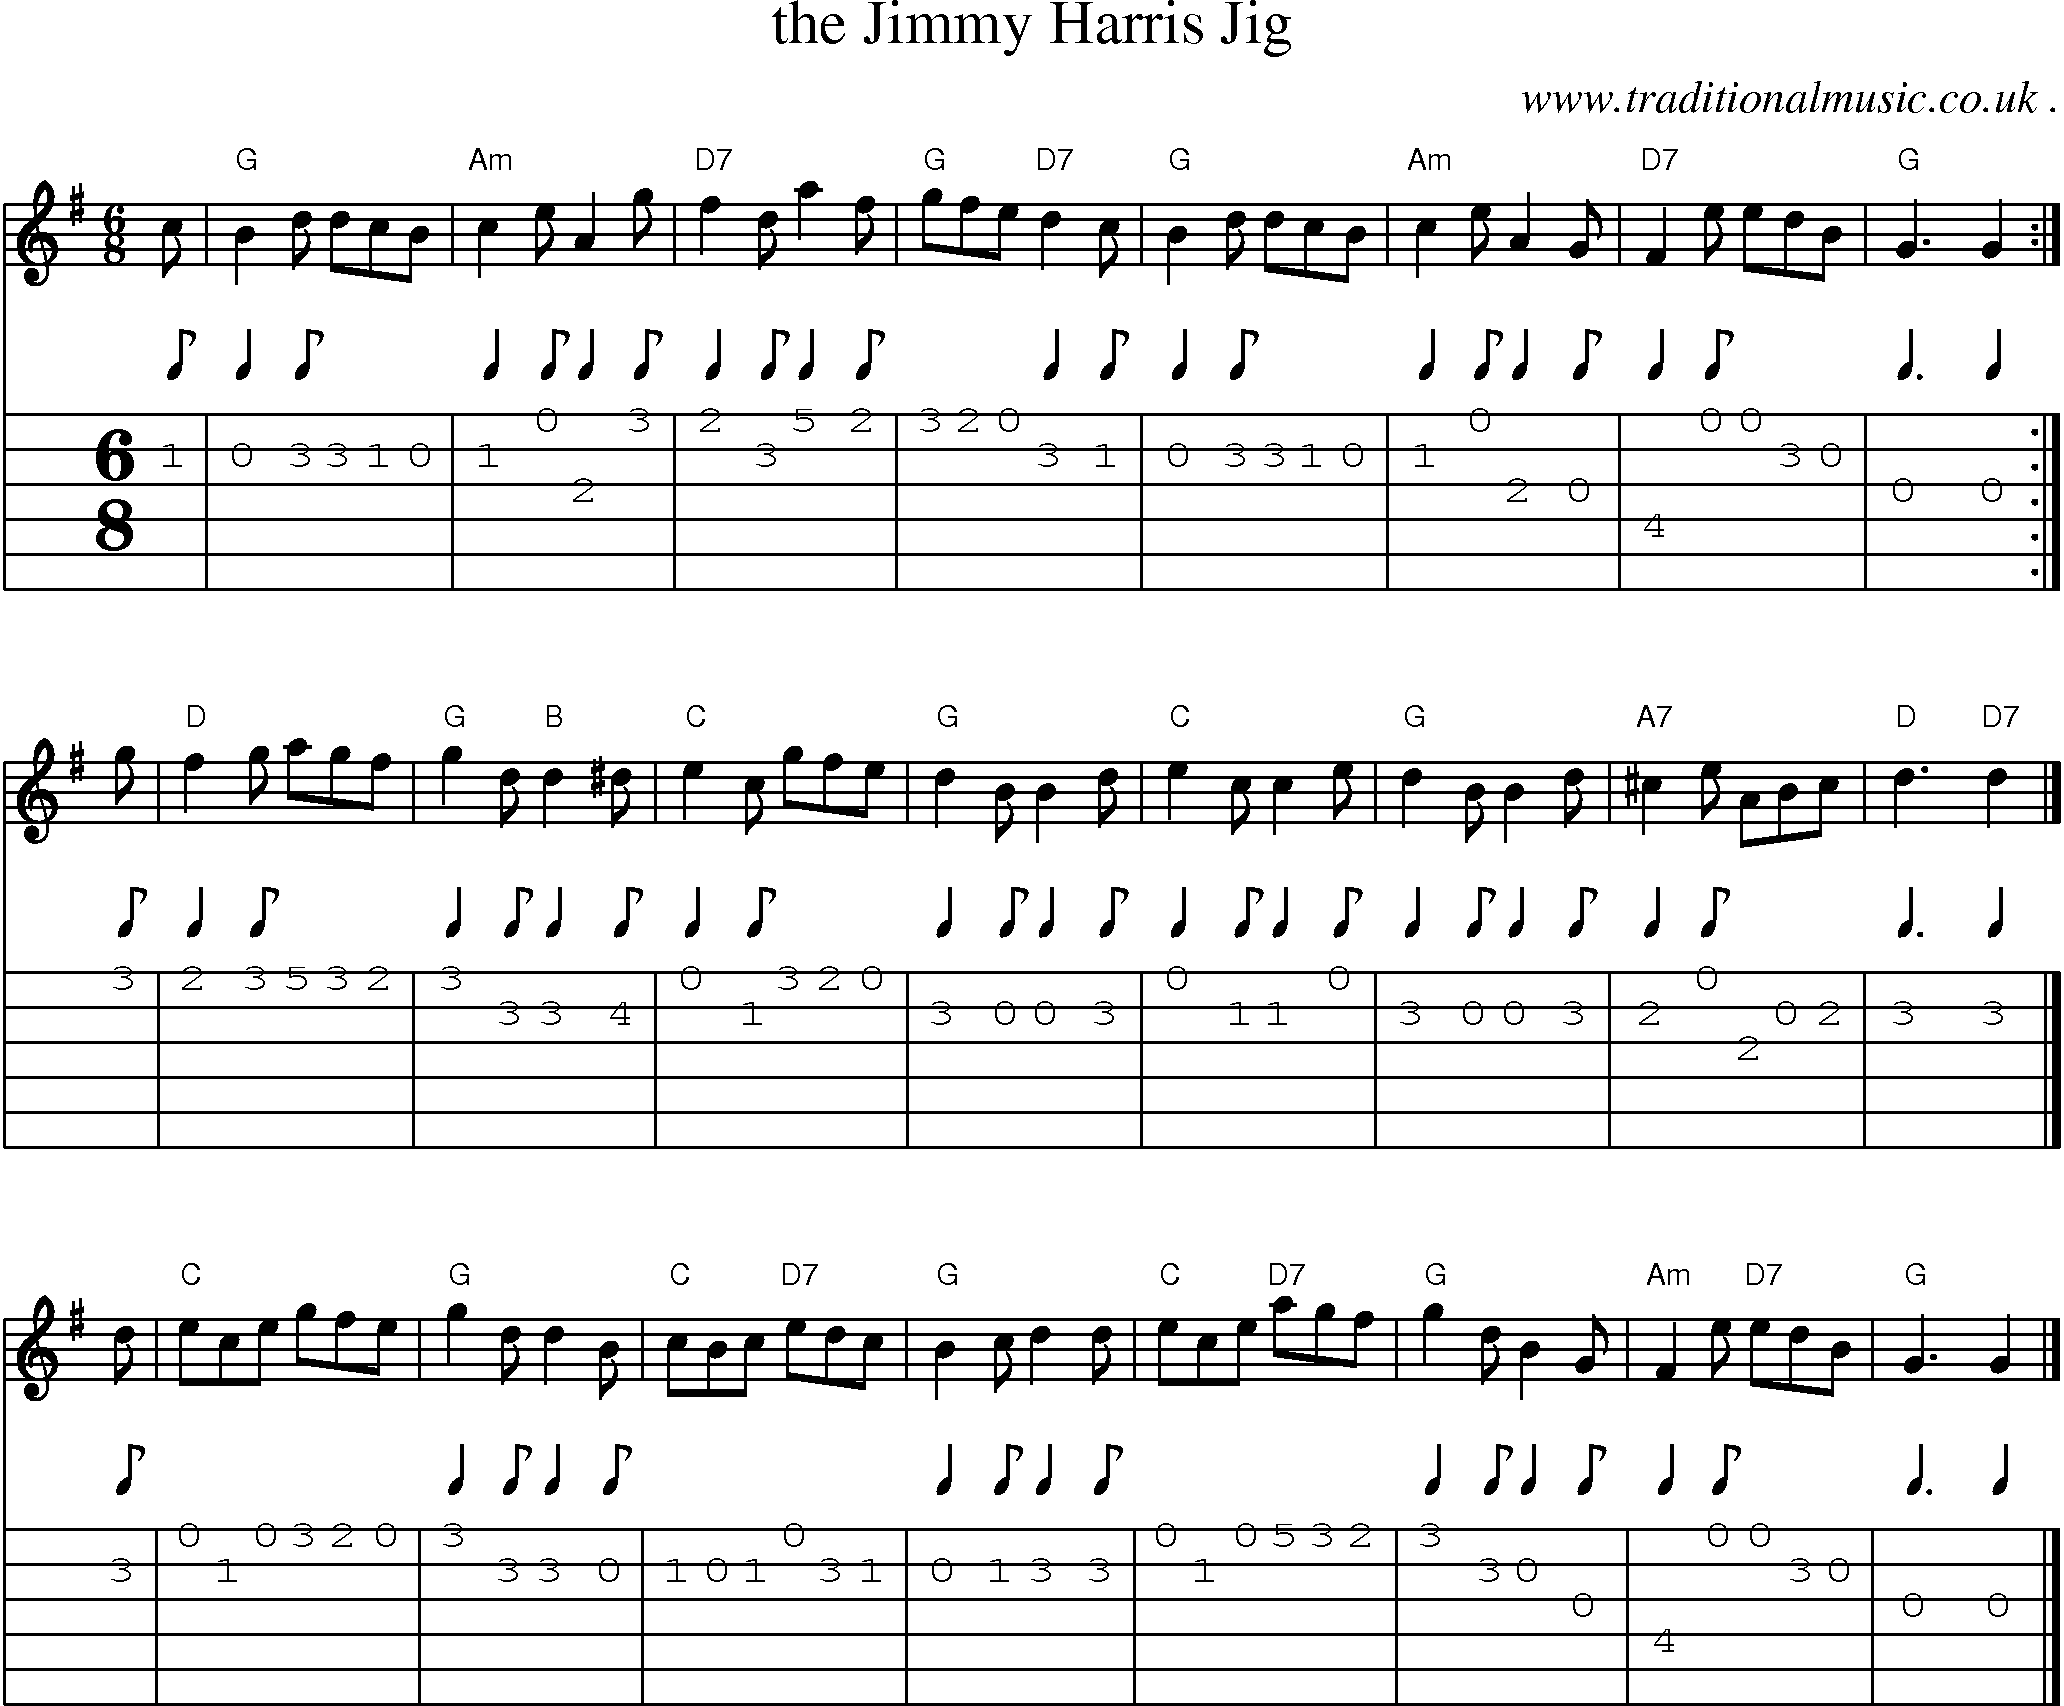 Sheet-music  score, Chords and Guitar Tabs for The Jimmy Harris Jig